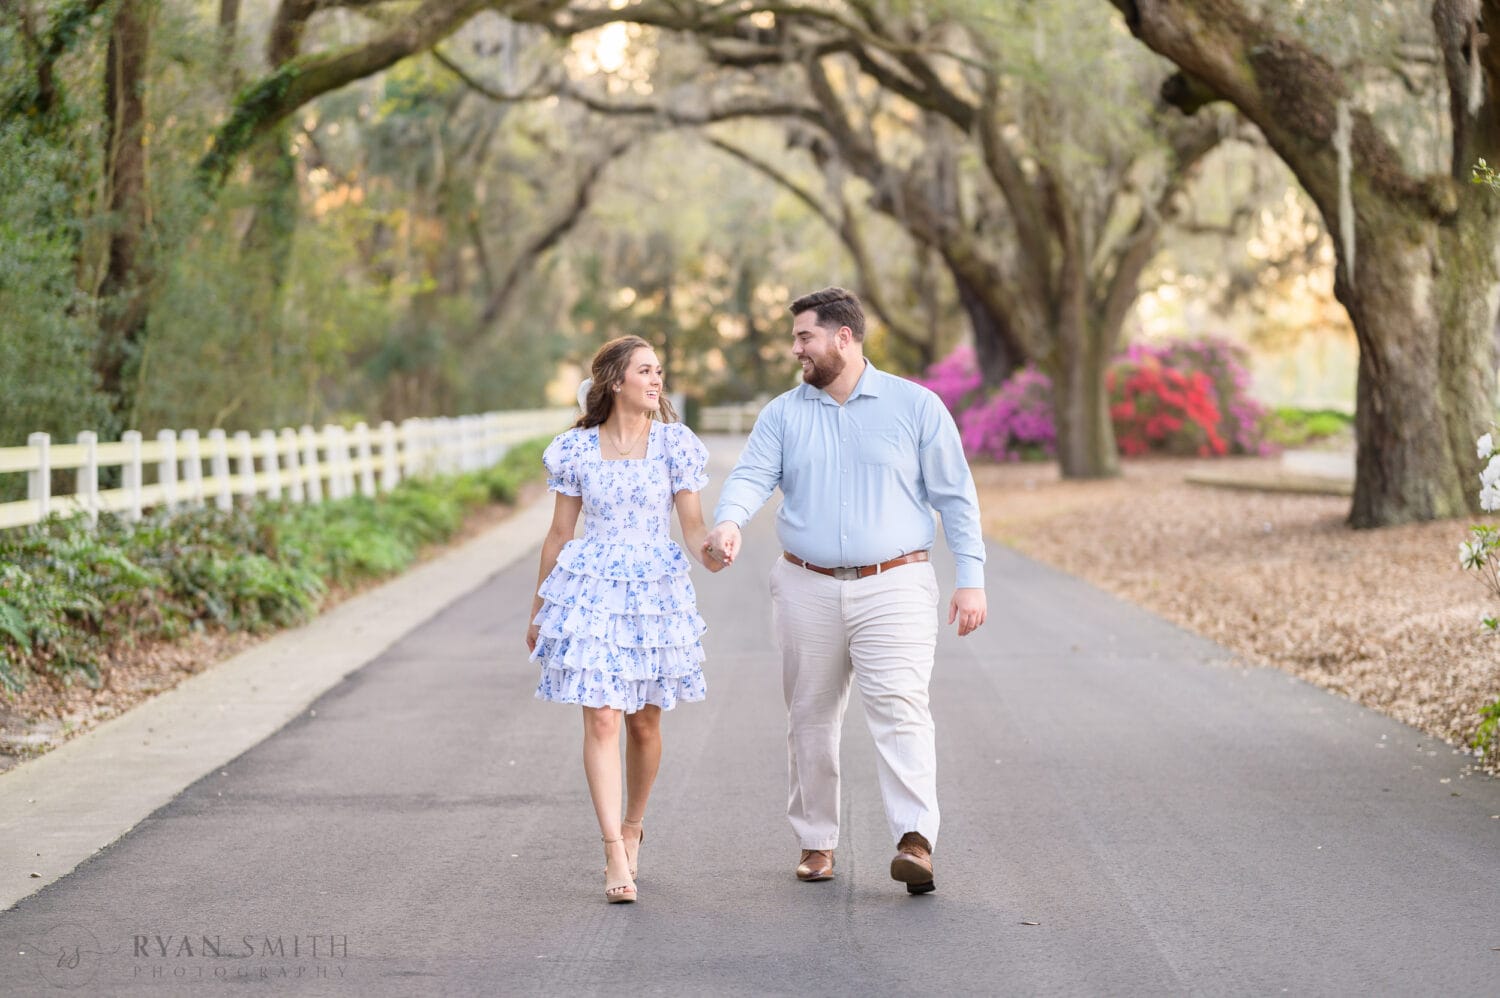 Holding hands walking under the oaks - Caledonia Golf and Fish Club